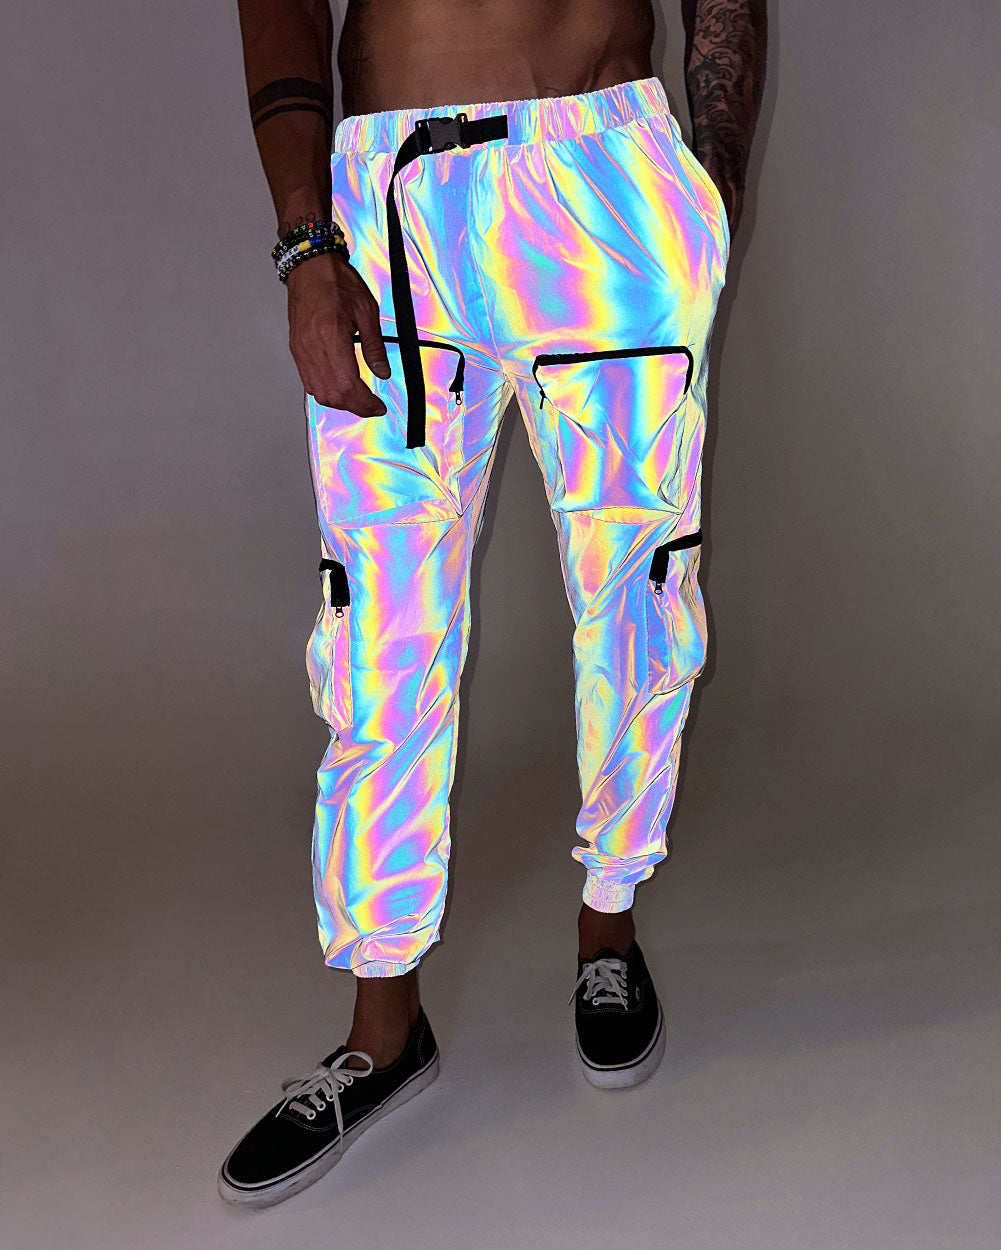 Rainbow Frequency Men's Reflective Shorts